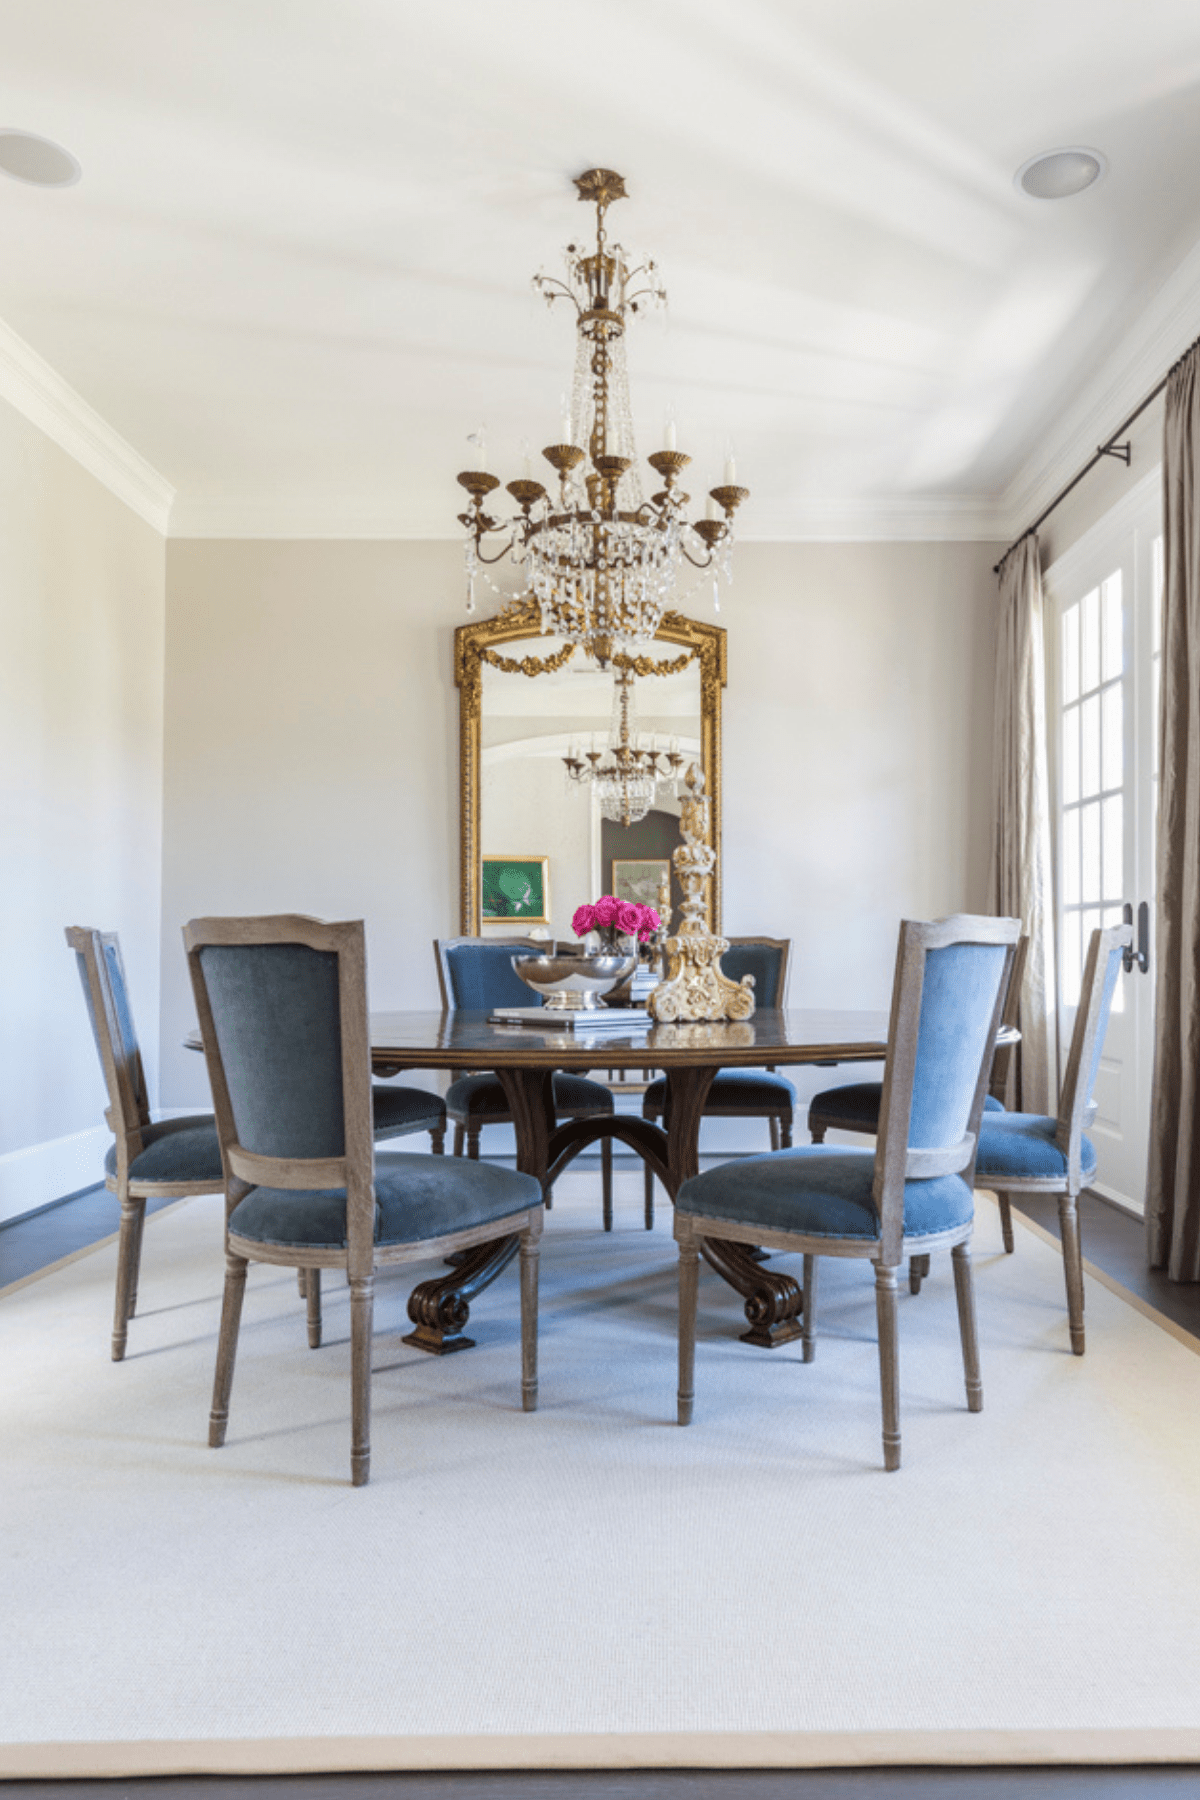 The Creekside dining area receives its French flair from the custom upholstered dining chairs and bronze finish chandelier.